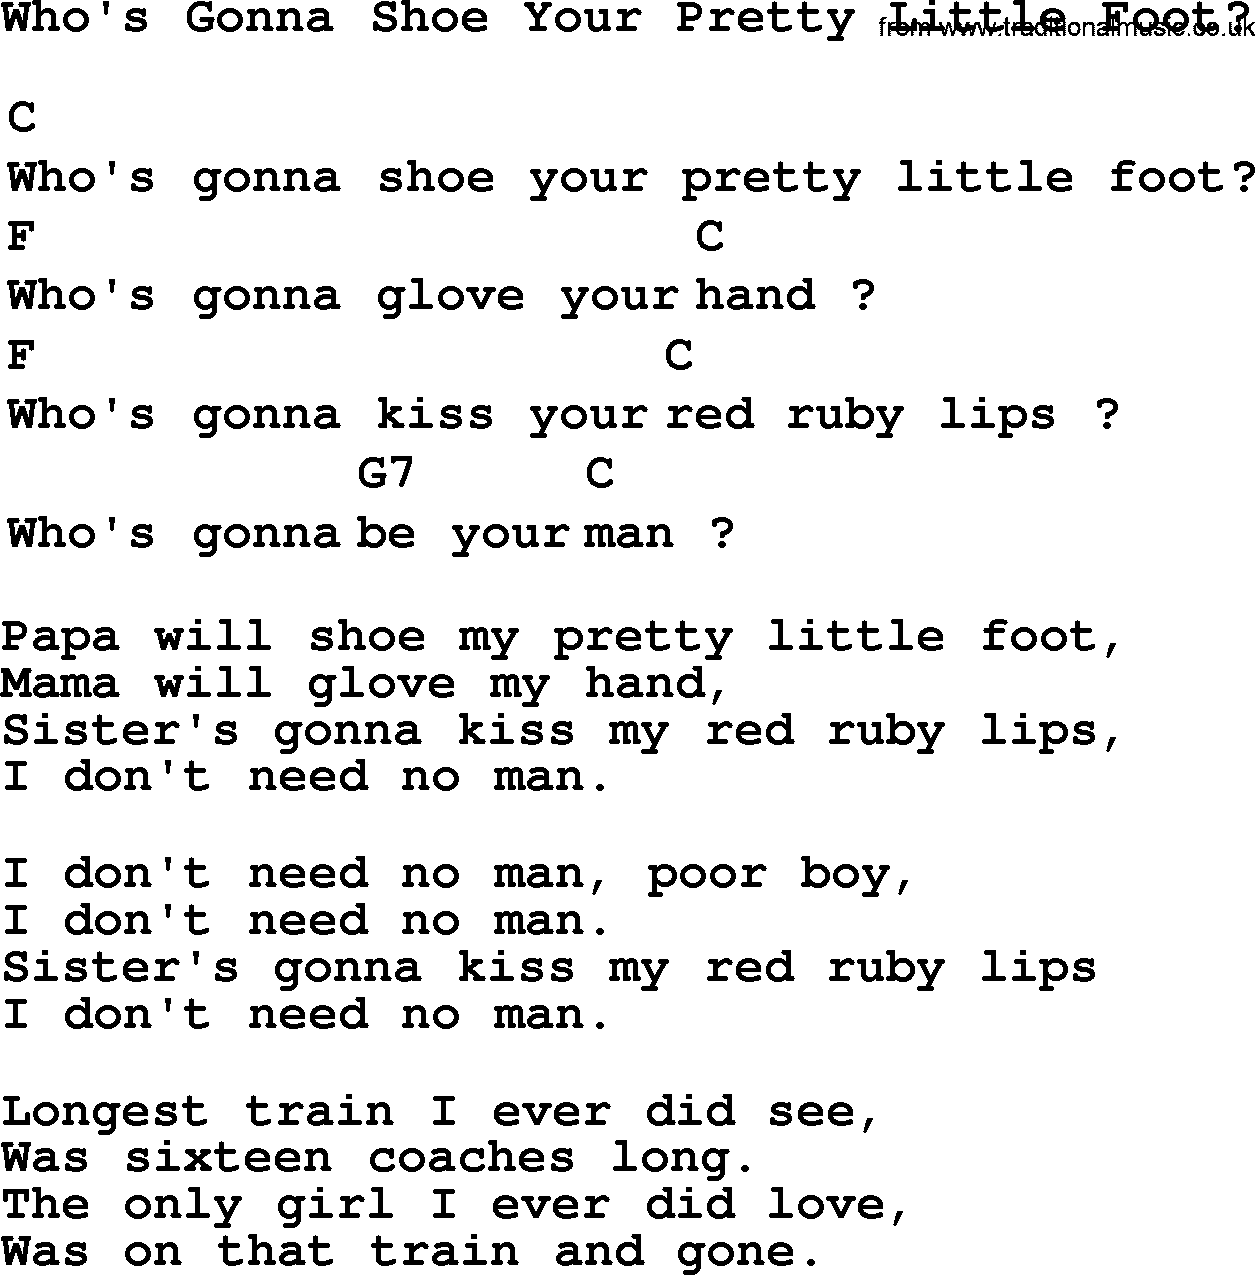 Top 1000 Most Popular Folk and Old-time Songs: Whos Gonna Shoe Your Pretty Little Foot, lyrics and chords